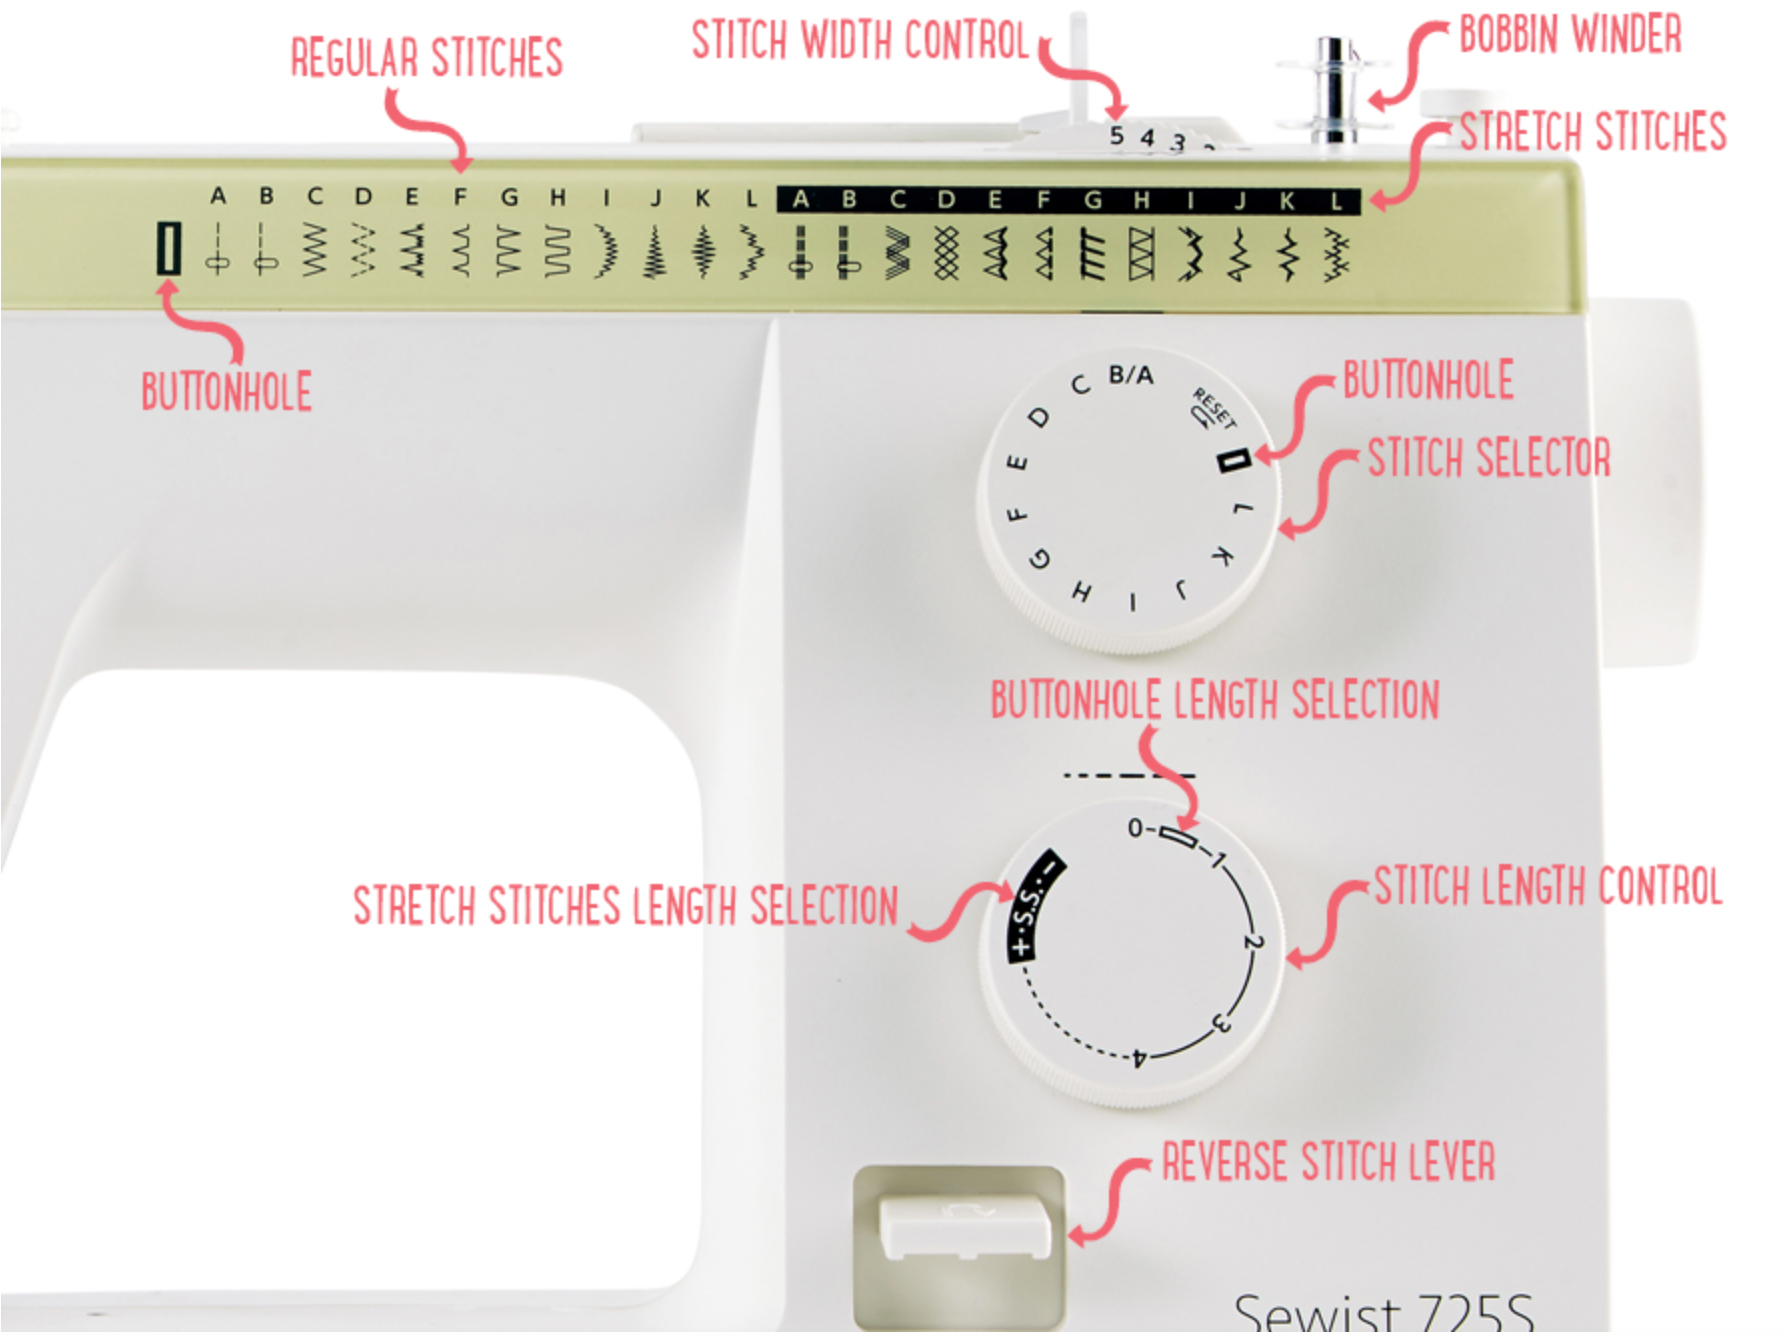 Close-up of Janome Sewist 725S control panel, detailing the stitch width control, buttonhole features, reverse stitch lever, and stitch length control with annotated labels.